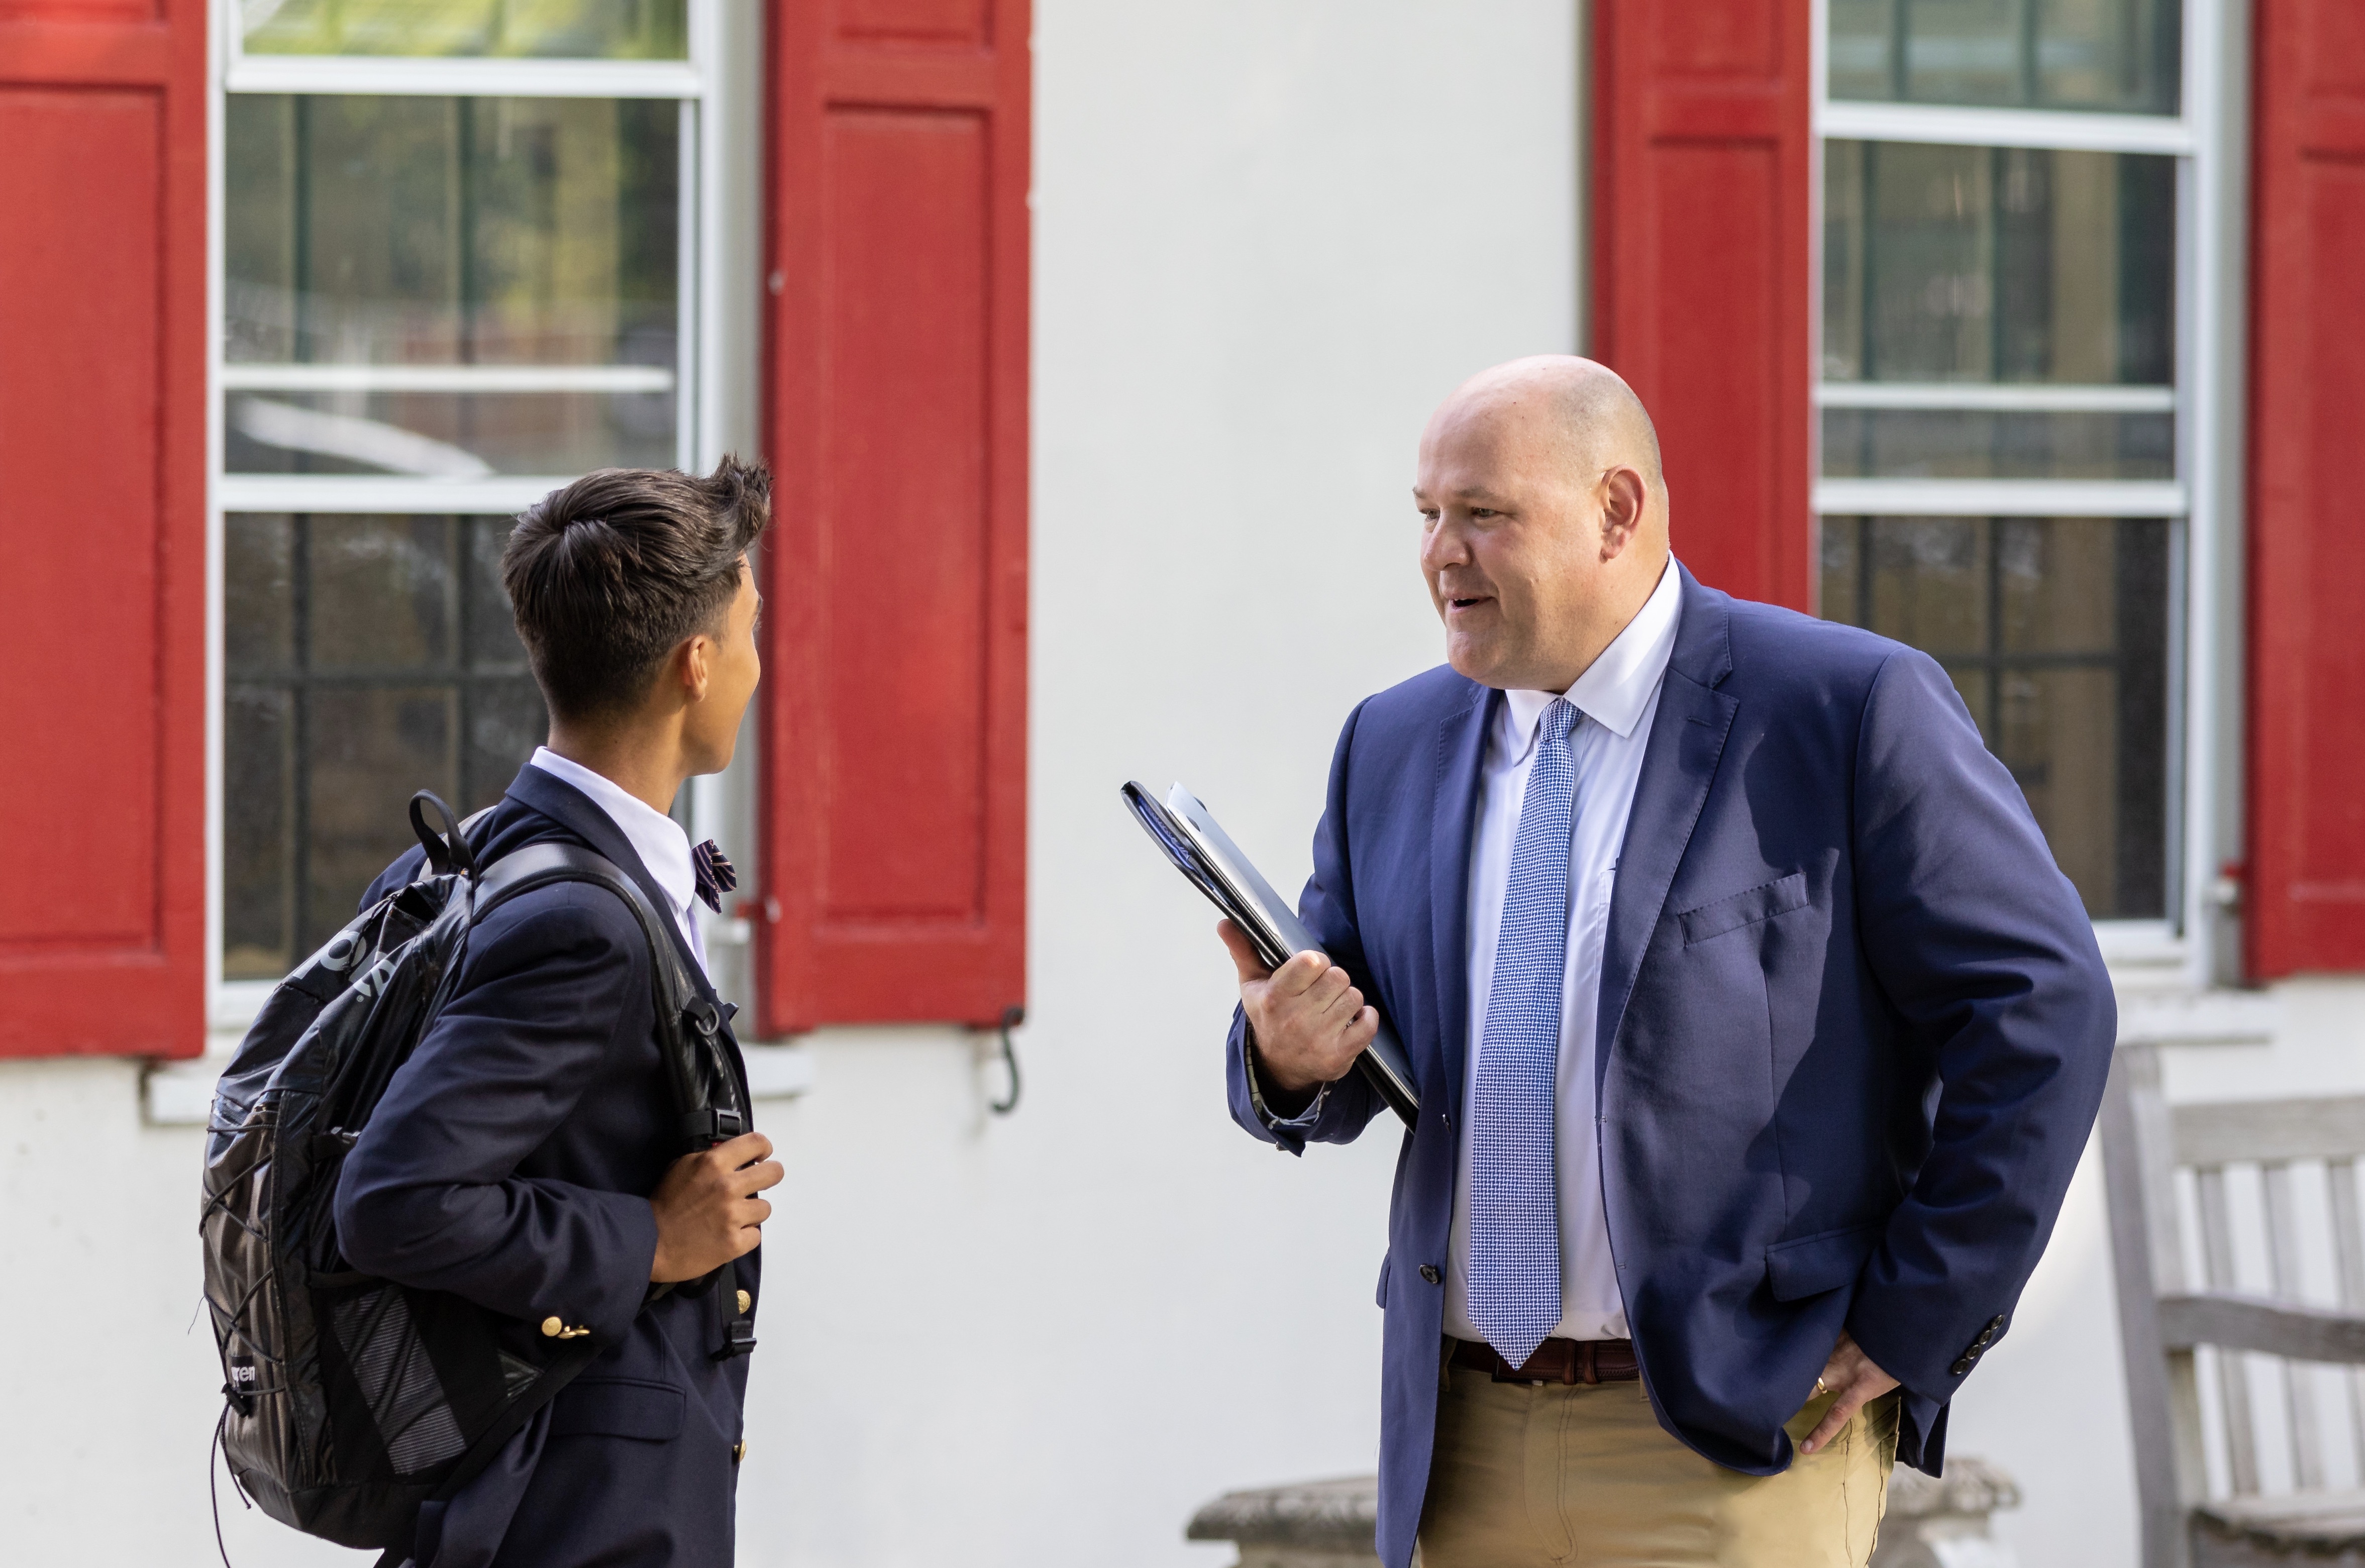 Kingswood Oxford builds strong connections between students and faculty